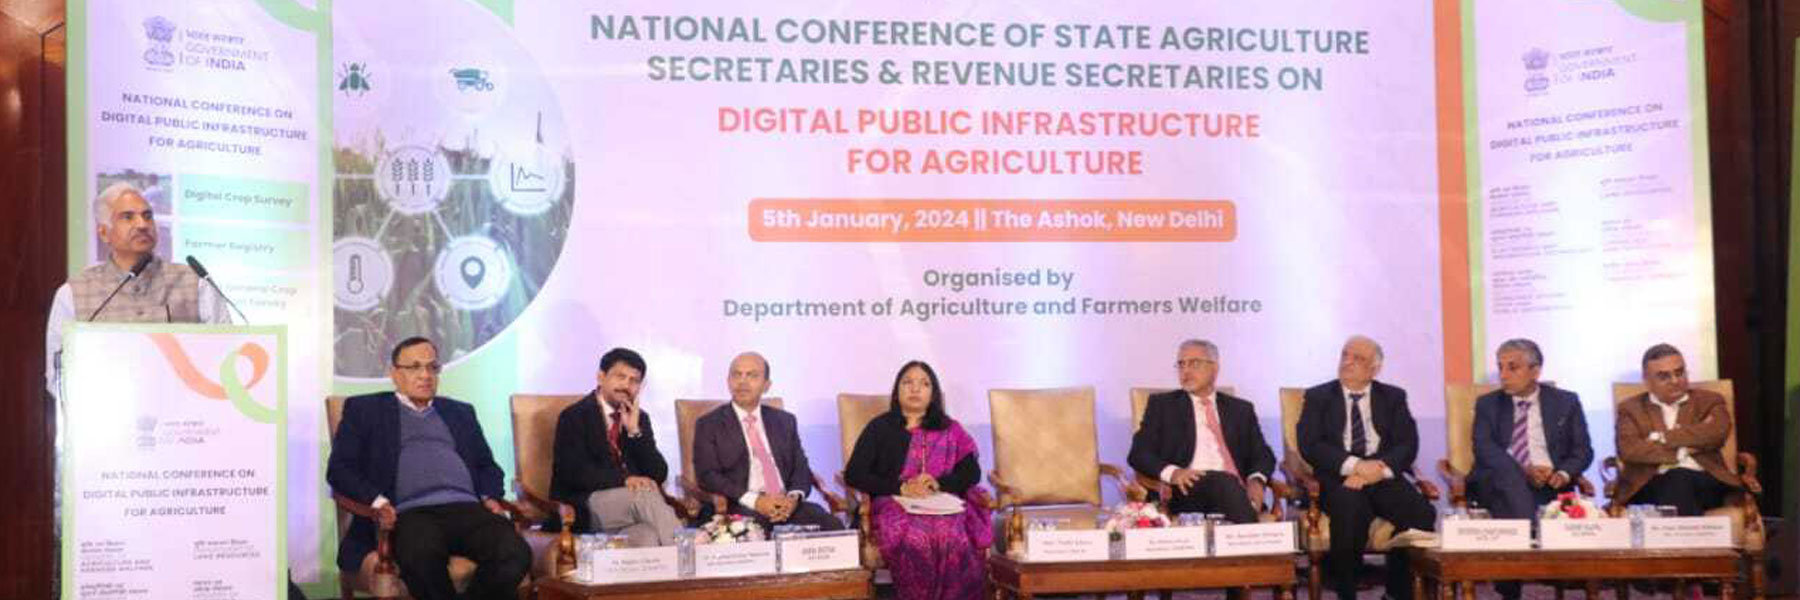 Digital Public Infrastructure For Agriculture